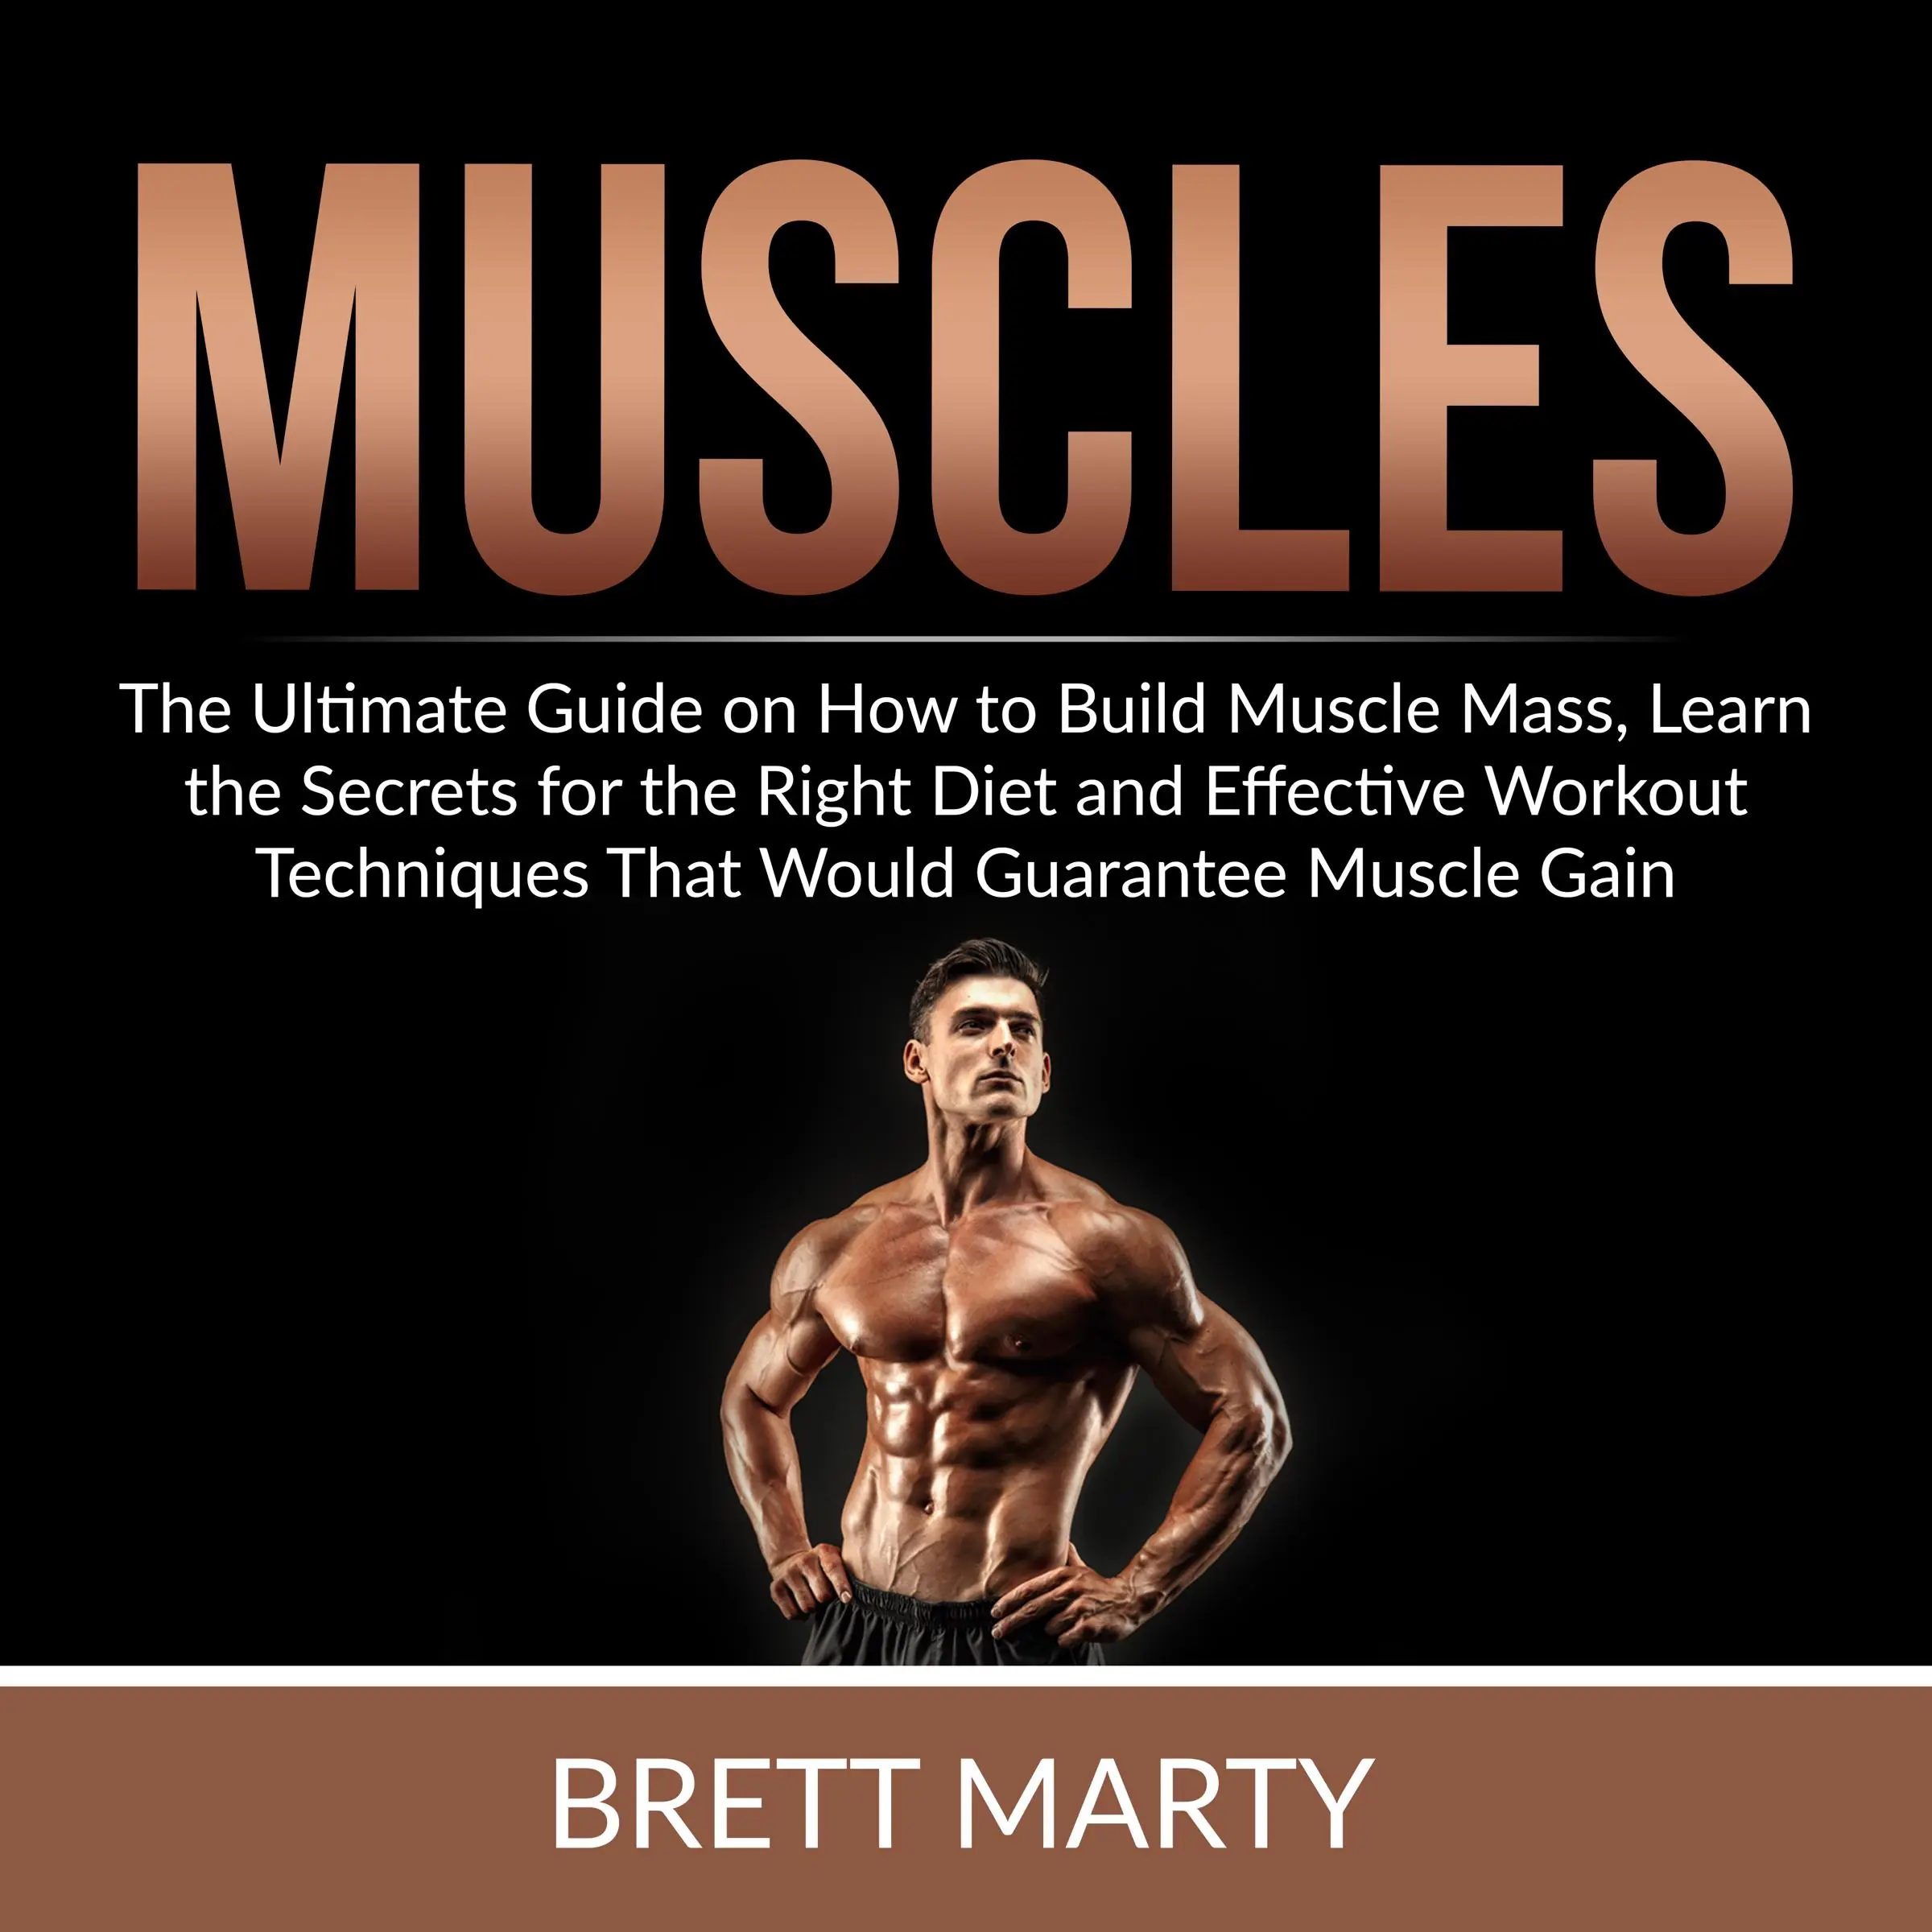 Muscles: The Ultimate Guide on How to Build Muscle Mass, Learn the Secrets for the Right Diet and Effective Workout Techniques That Would Guarantee Muscle Gain Audiobook by Brett Marty